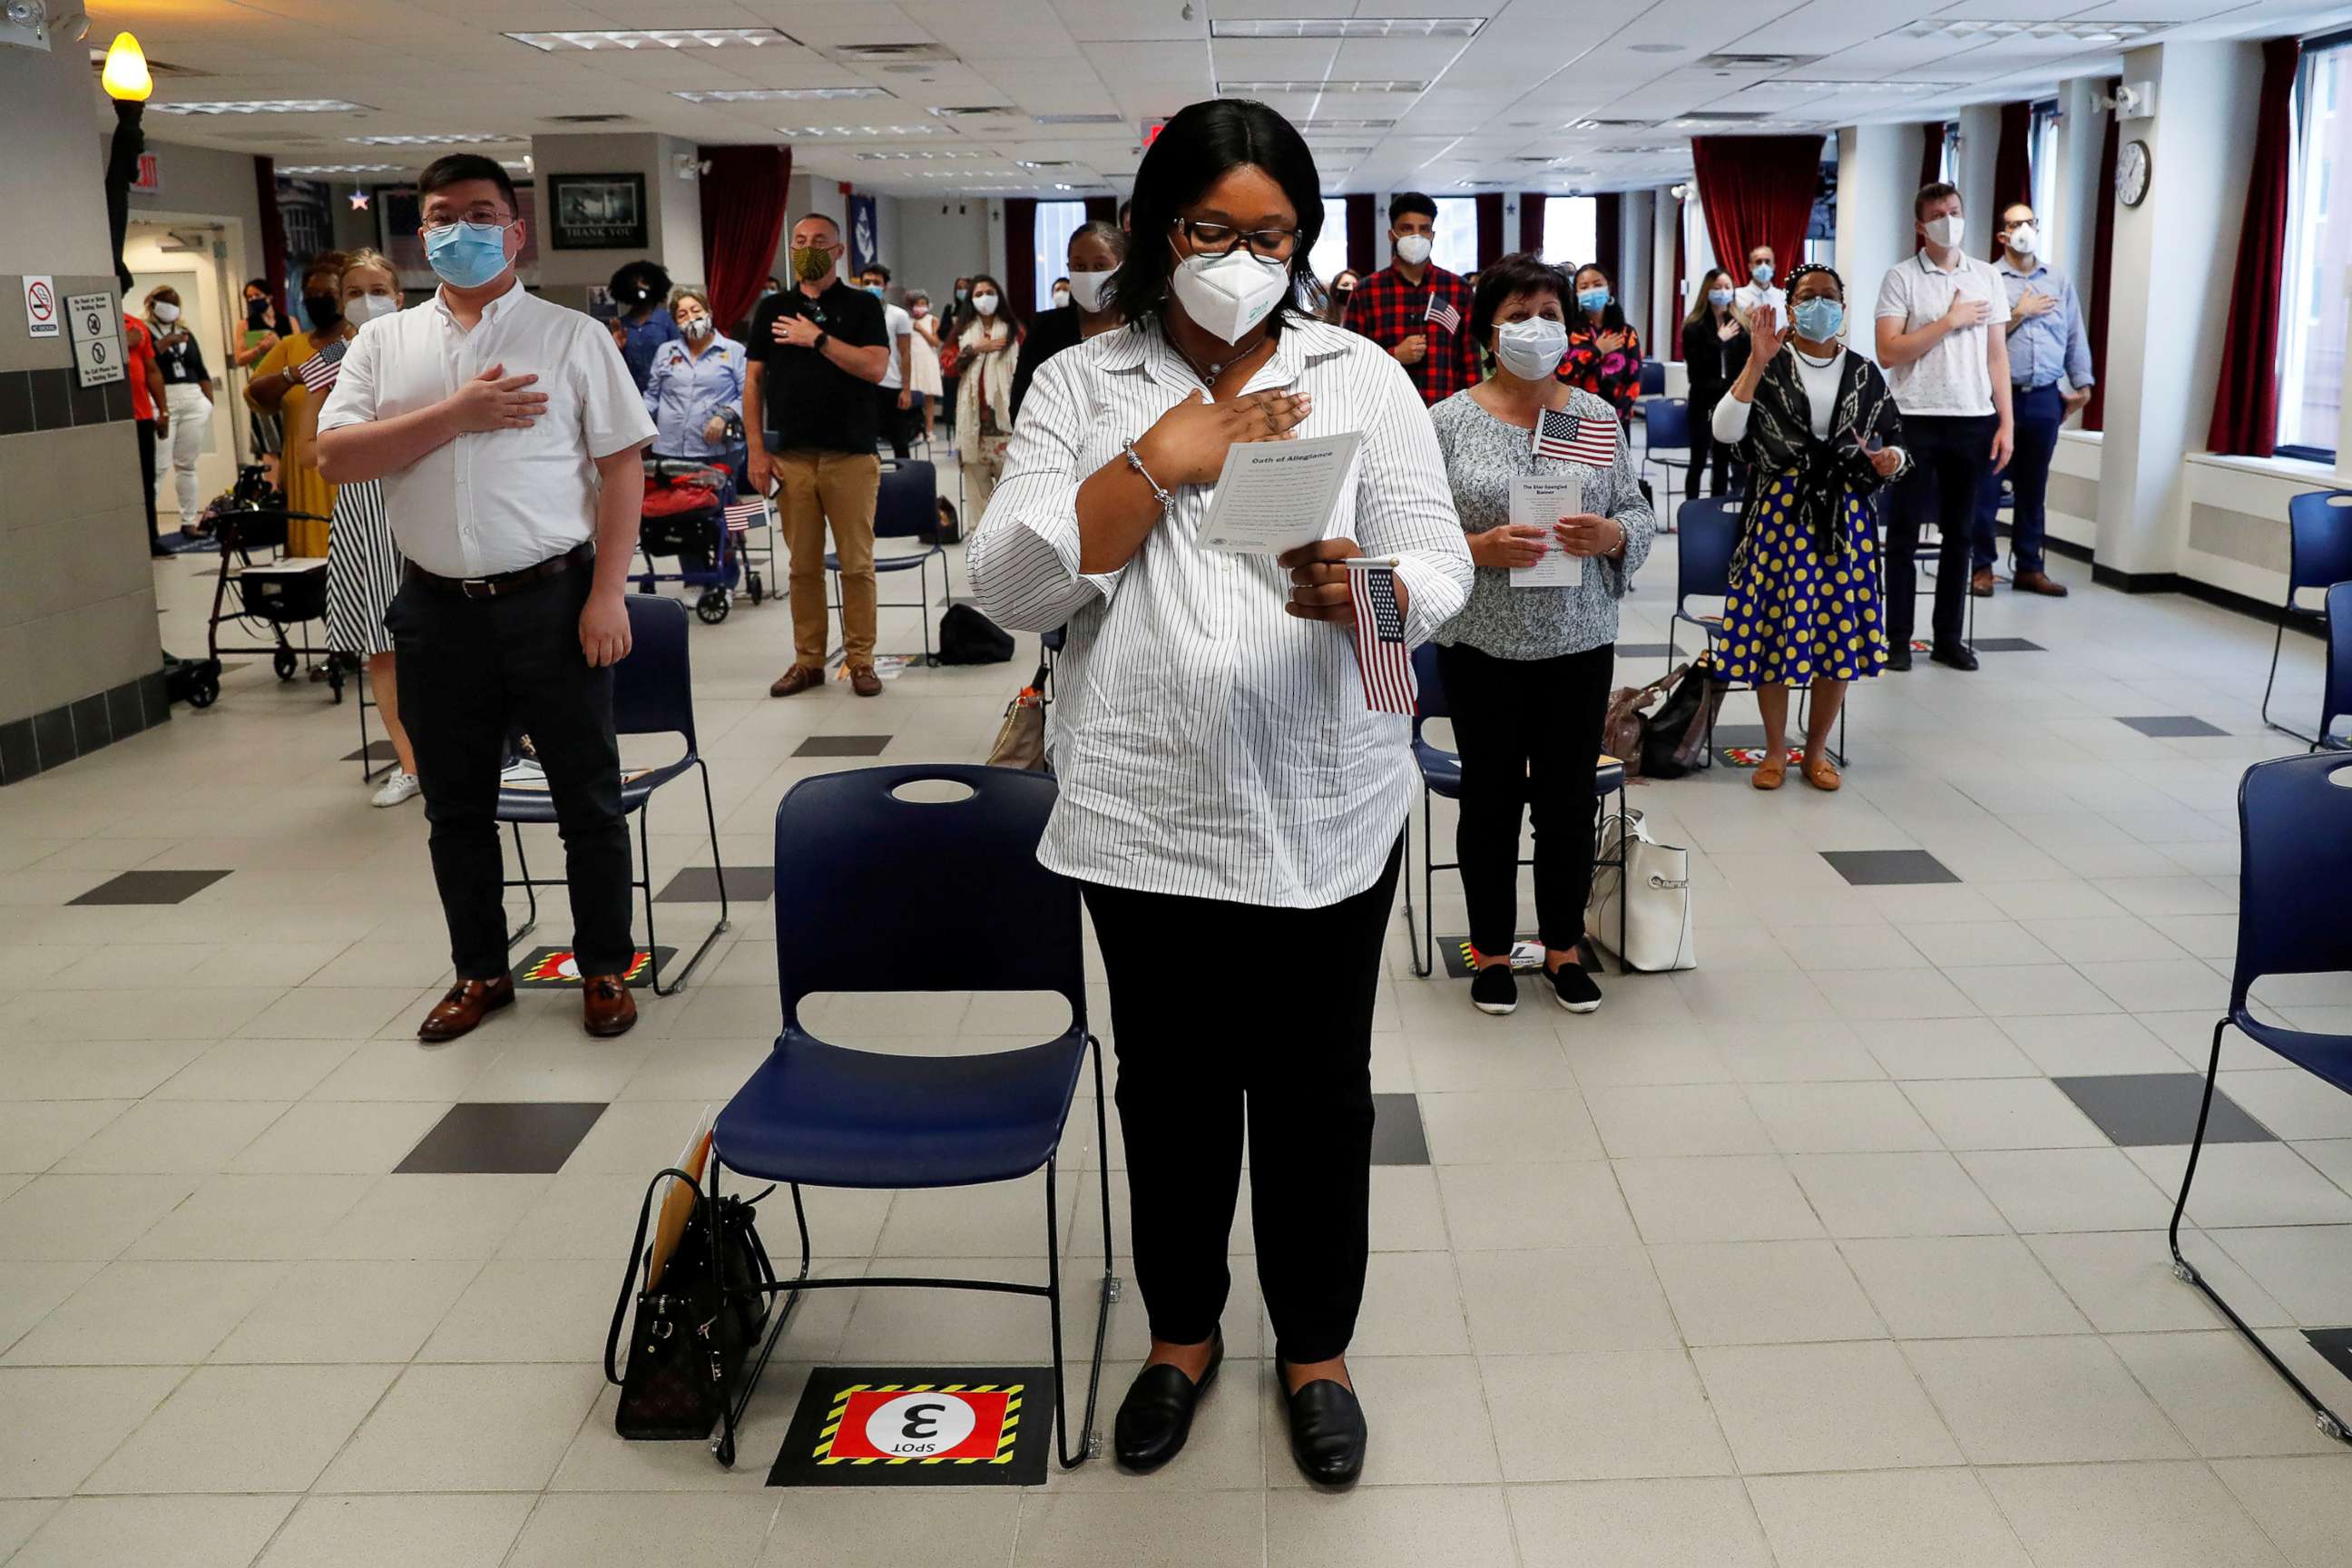 PHOTO: Ifeoma Eh, a citizen candidate from Nigeria, stands with others during a U.S. Citizenship and Immigration Services naturalization ceremony in New York, July 22, 2020.